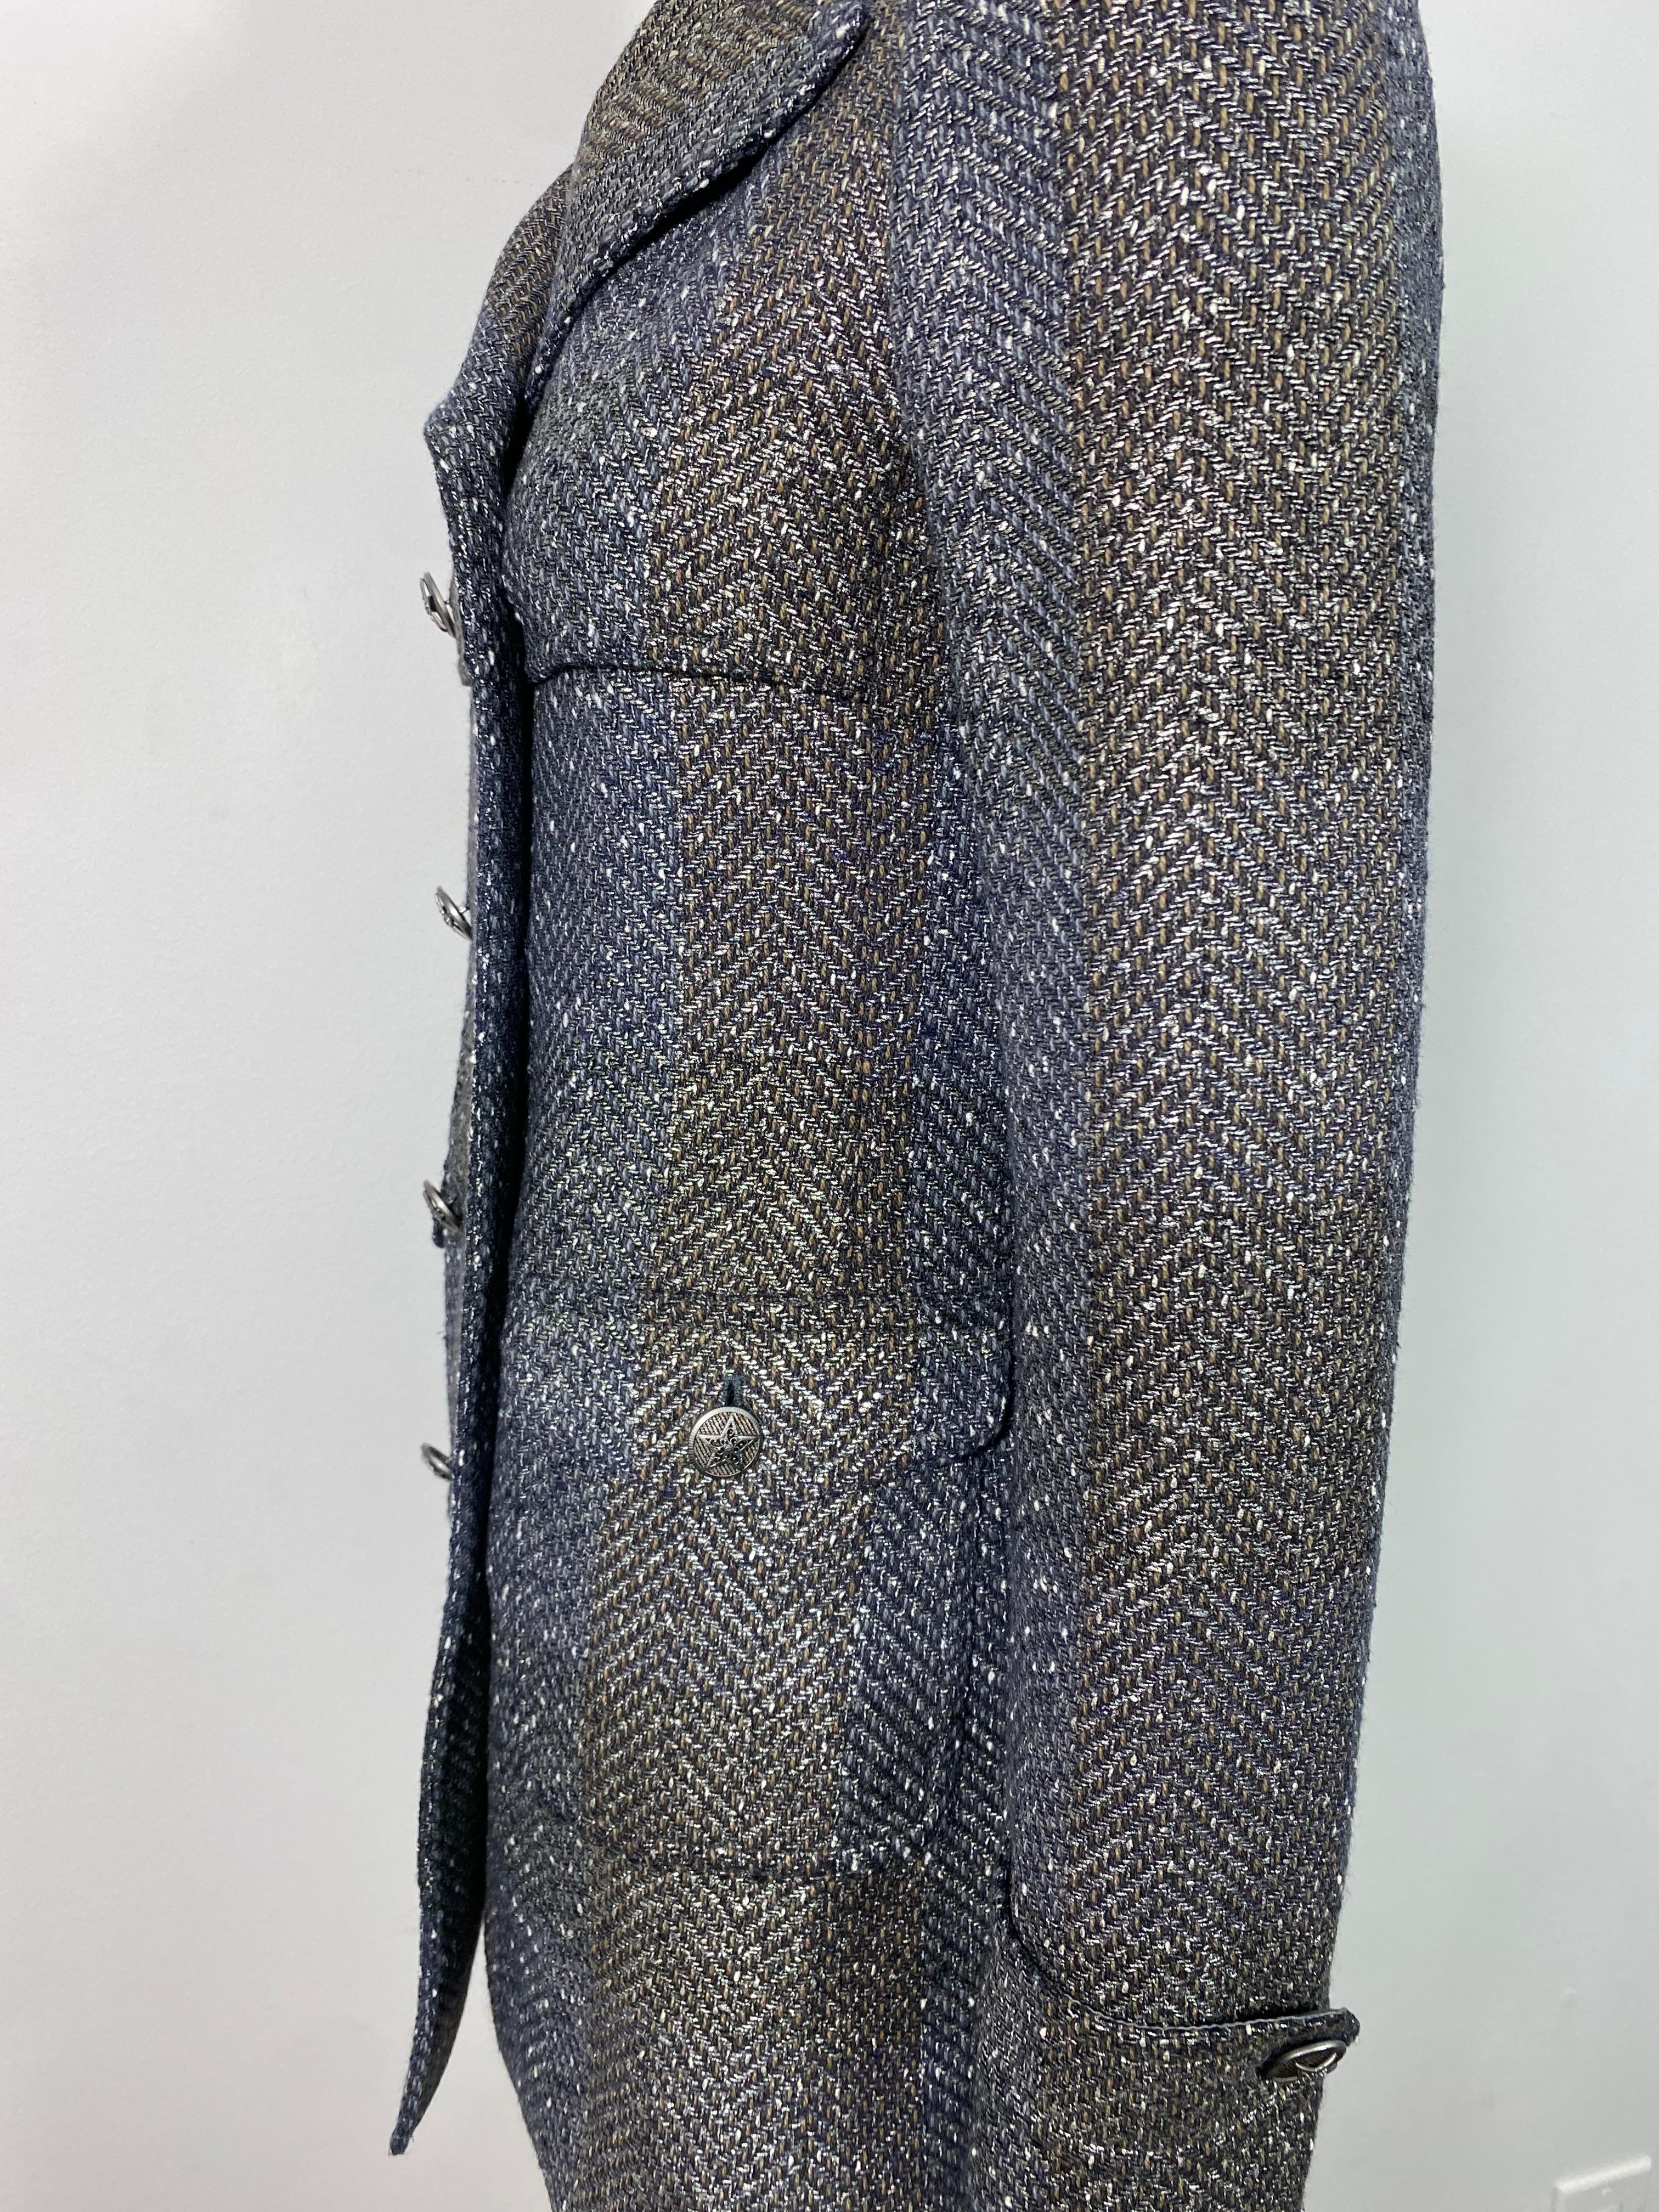 Chanel Fall 2007 Grey and Metallic Double Breasted Jacket - Size 34 For Sale 4